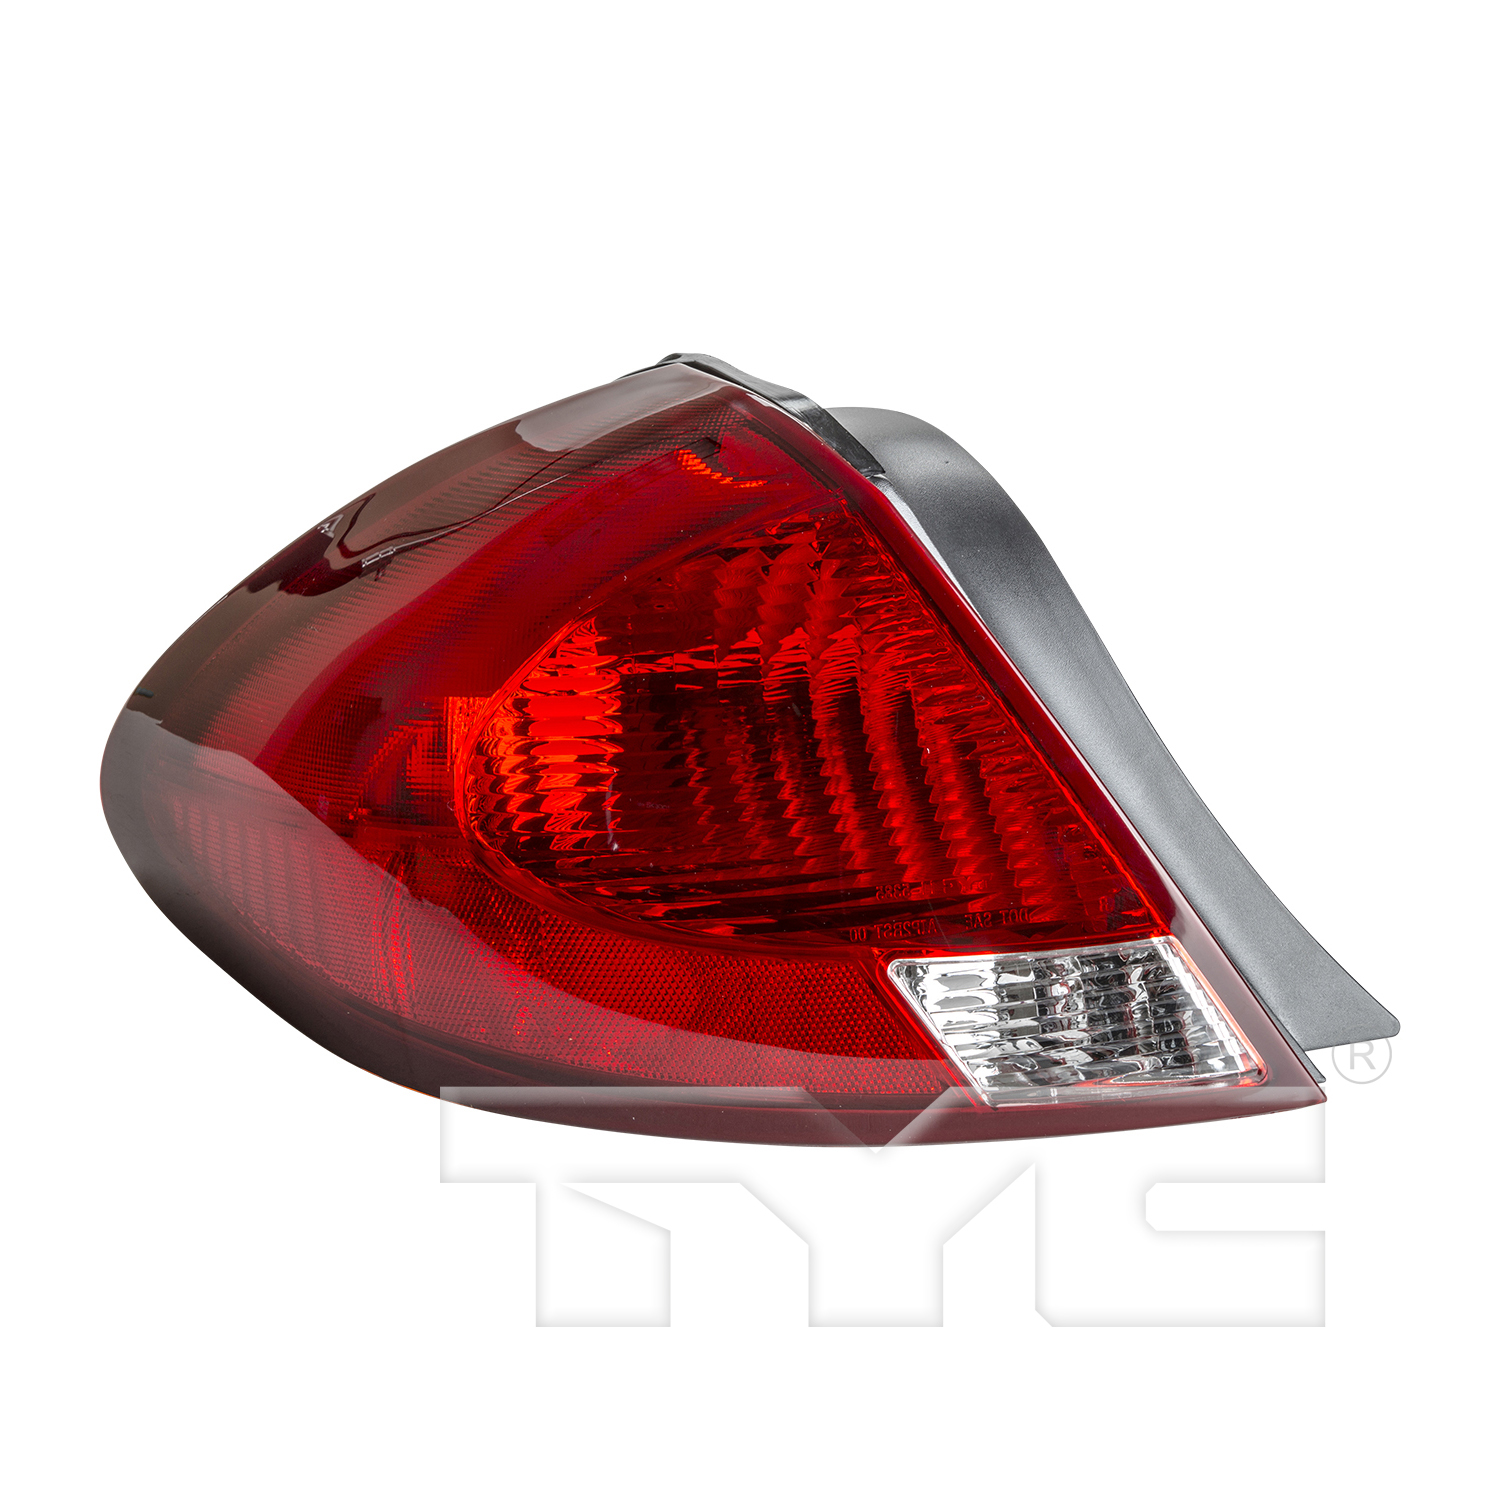 Aftermarket TAILLIGHTS for FORD - TAURUS, TAURUS,00-02,LT Taillamp assy